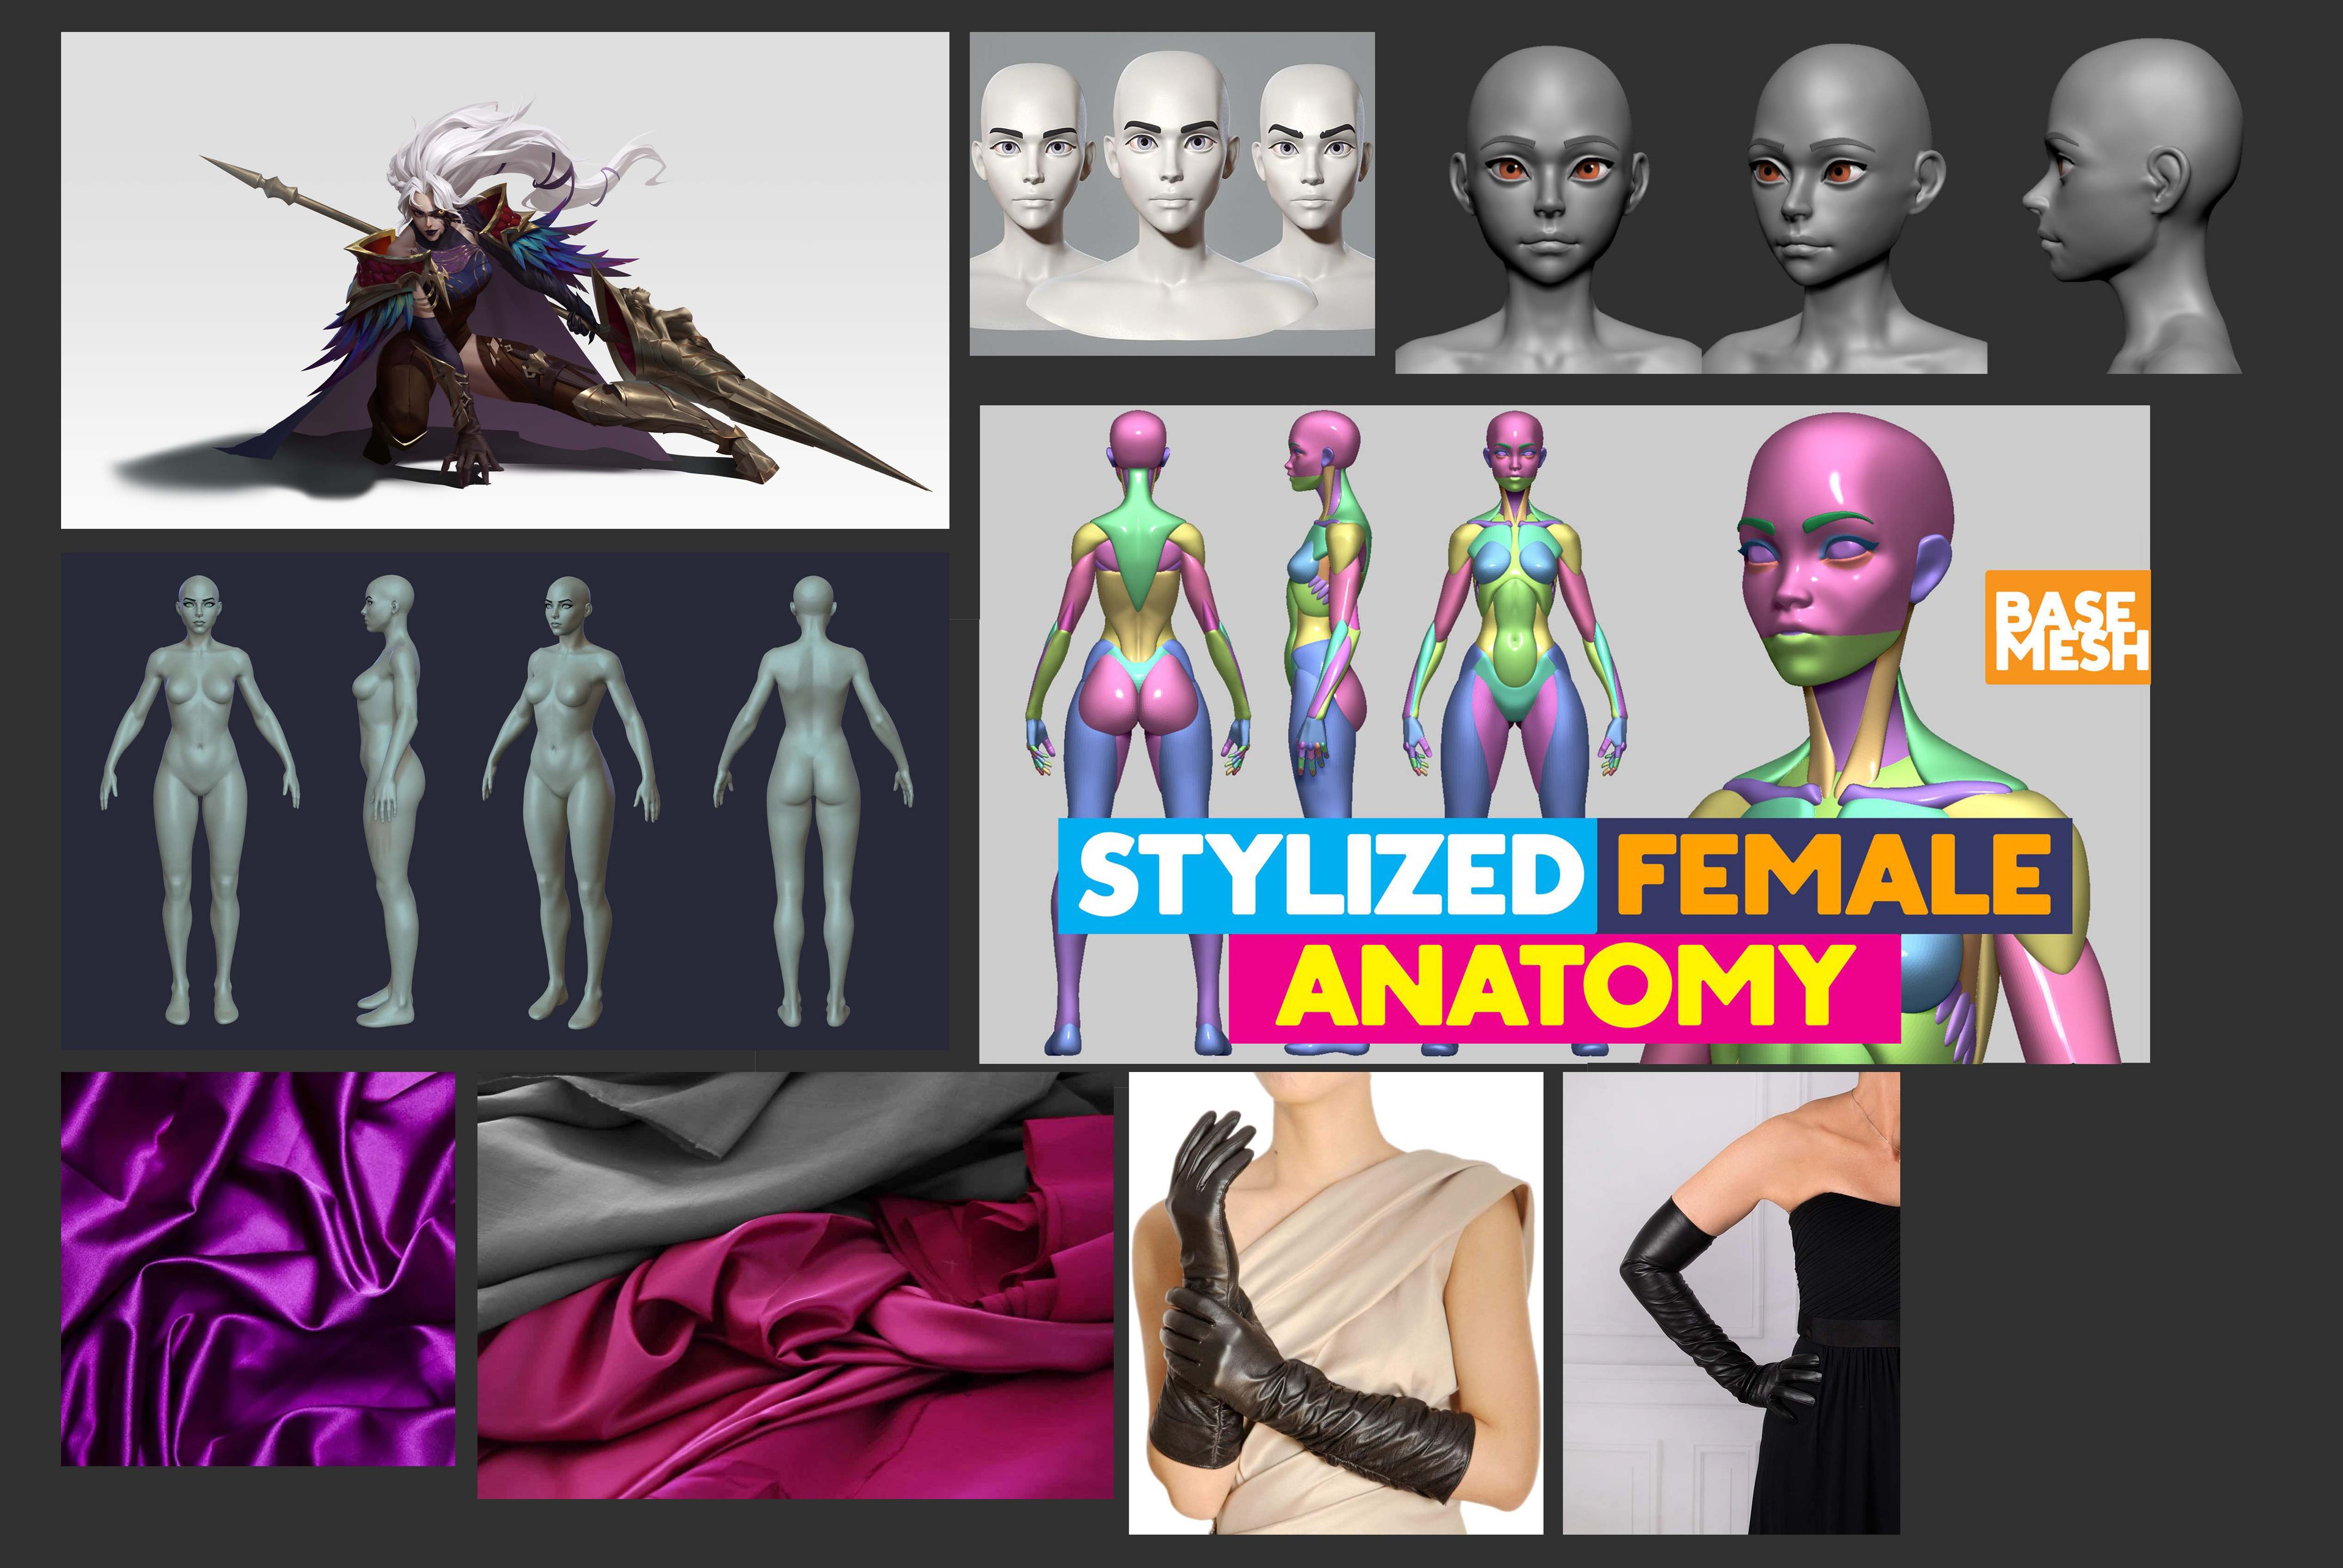 Compiled images of some of the references I used for sculpting and texturing